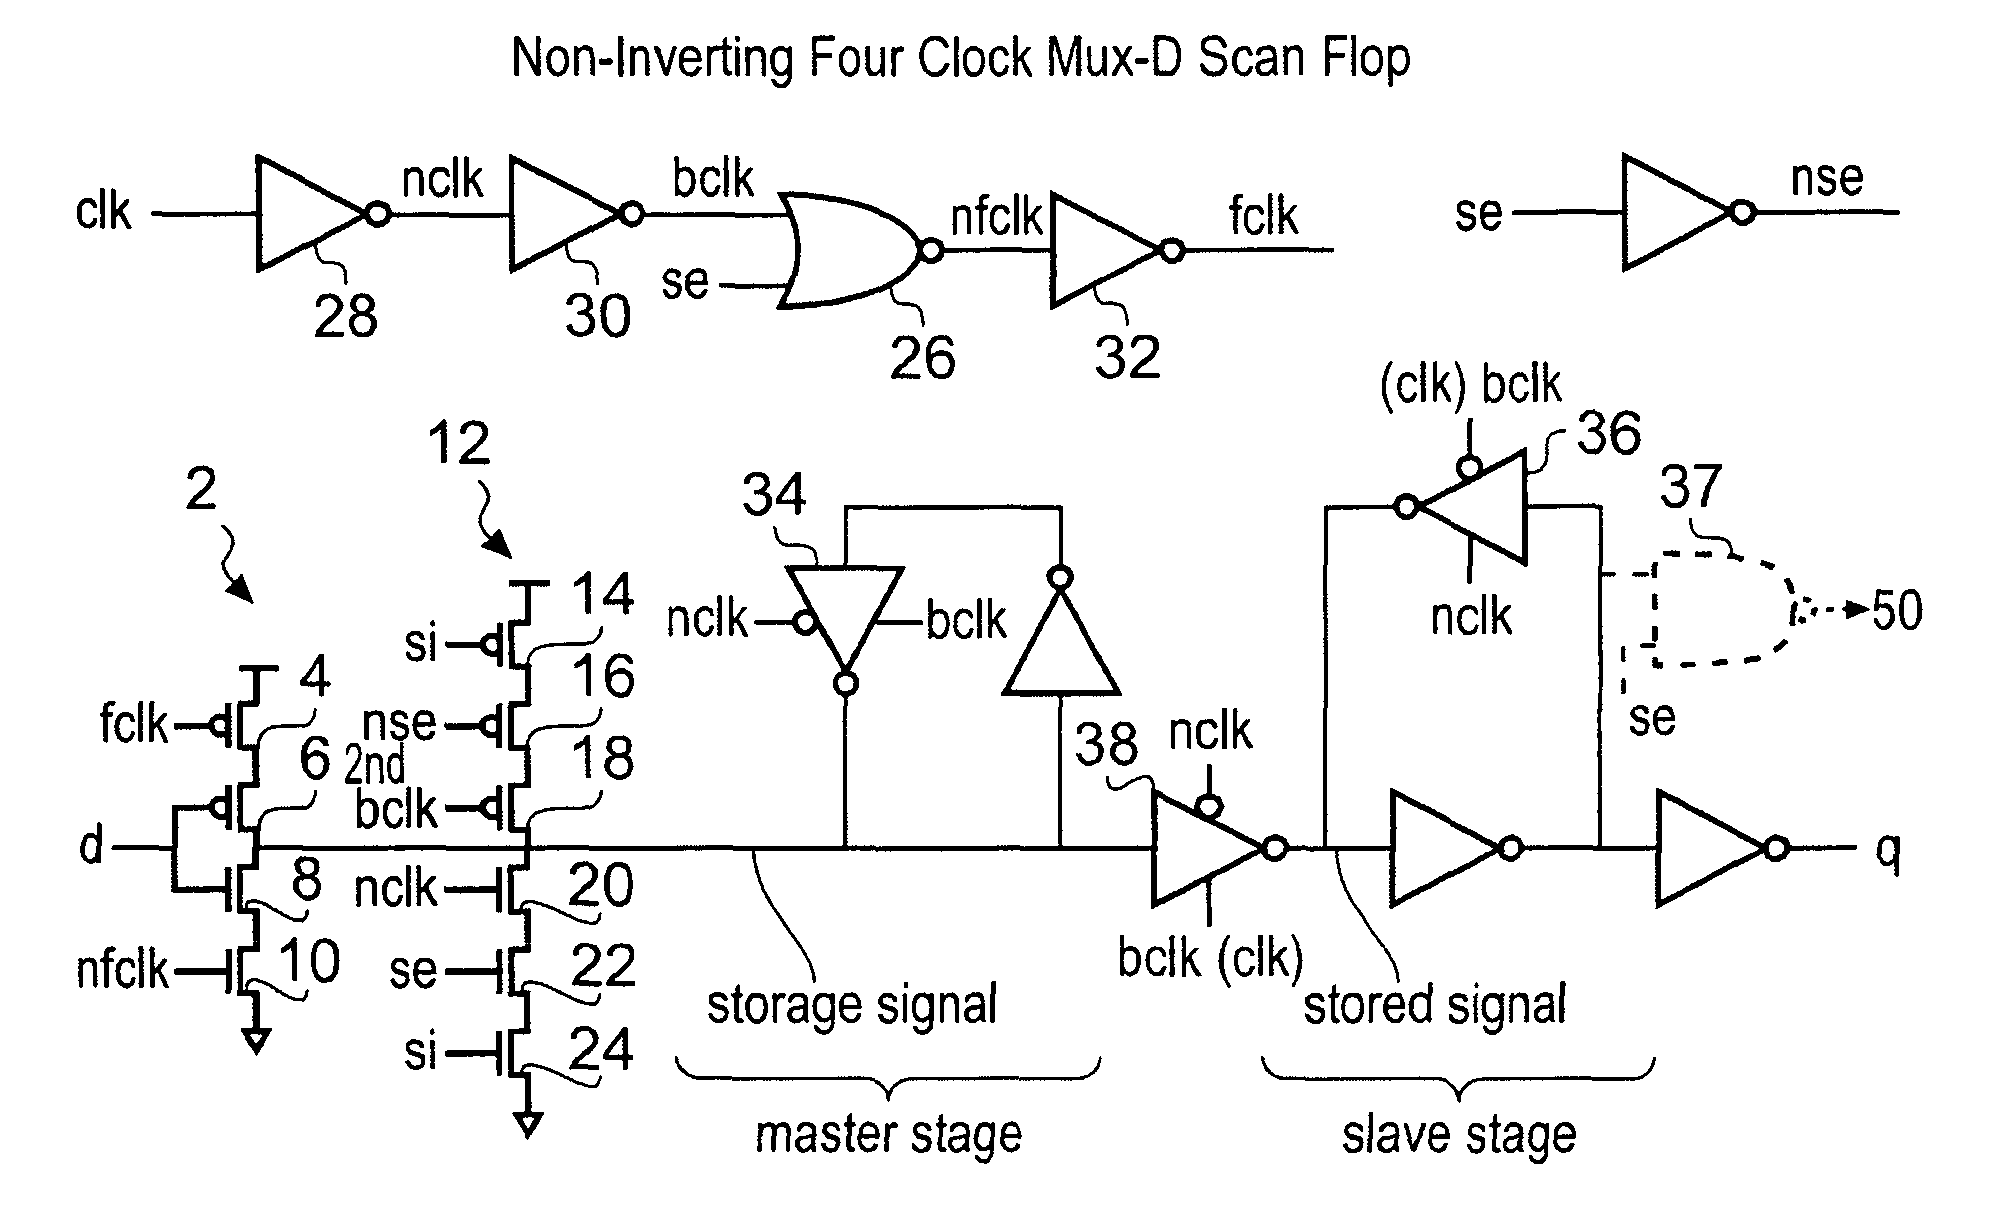 Clock control of state storage circuitry